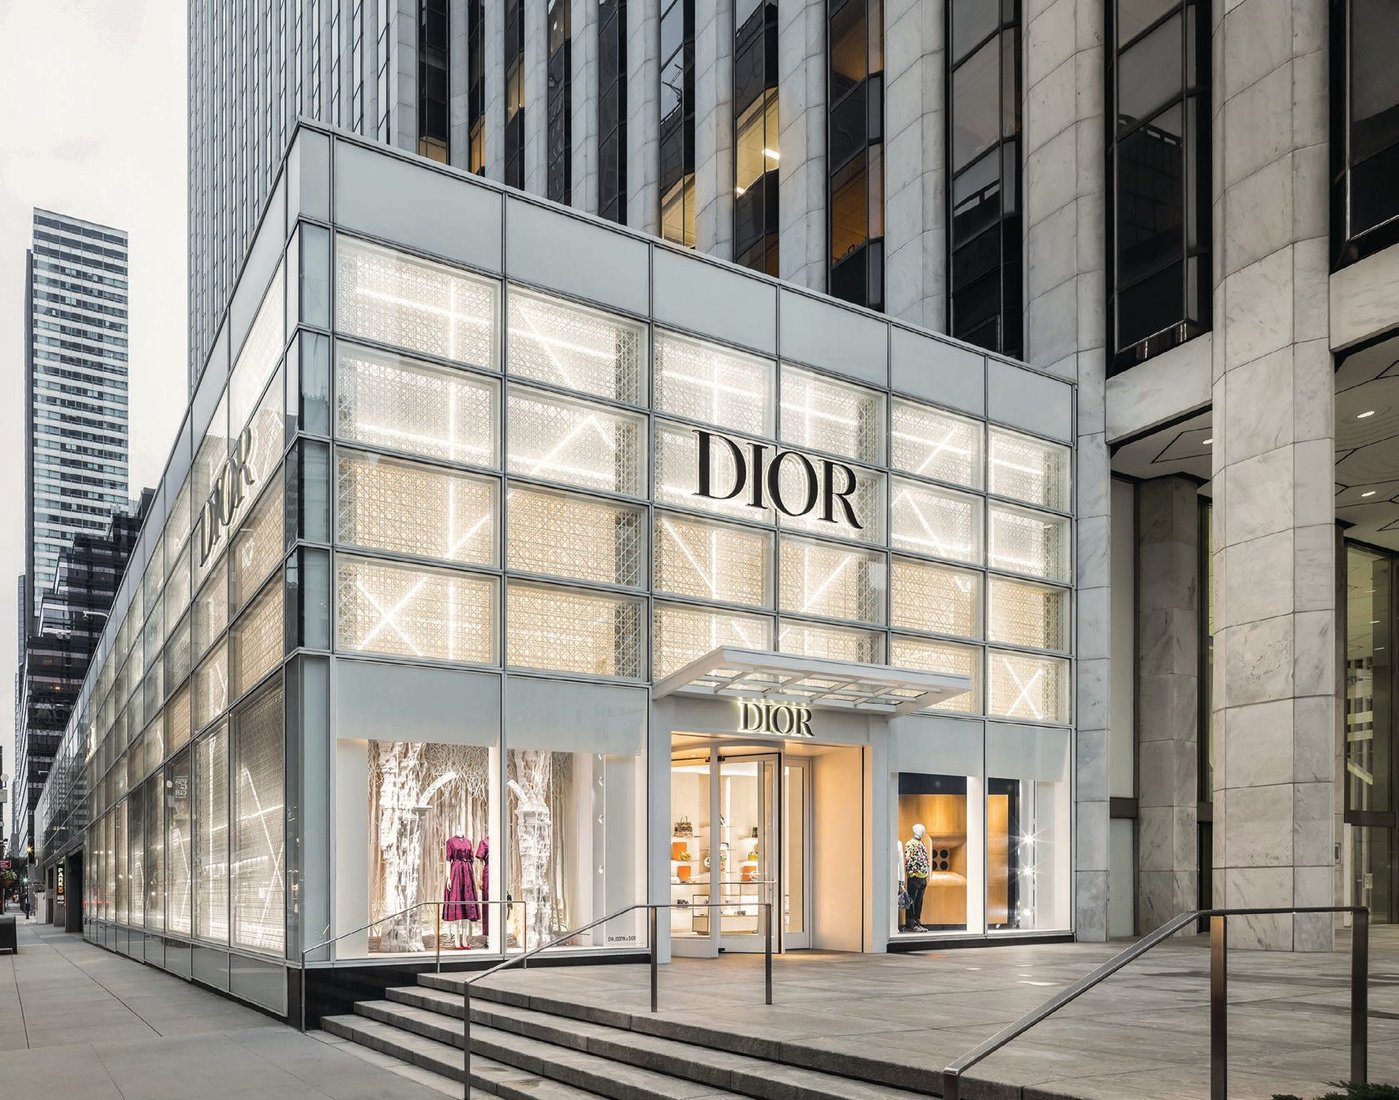 Inside Dior’s Fifth Avenue boutique, products are cross-merchandised, ushering in a novel display concept that launched in the Paris Champs-Elysée boutique. PHOTO BY PAUL VU